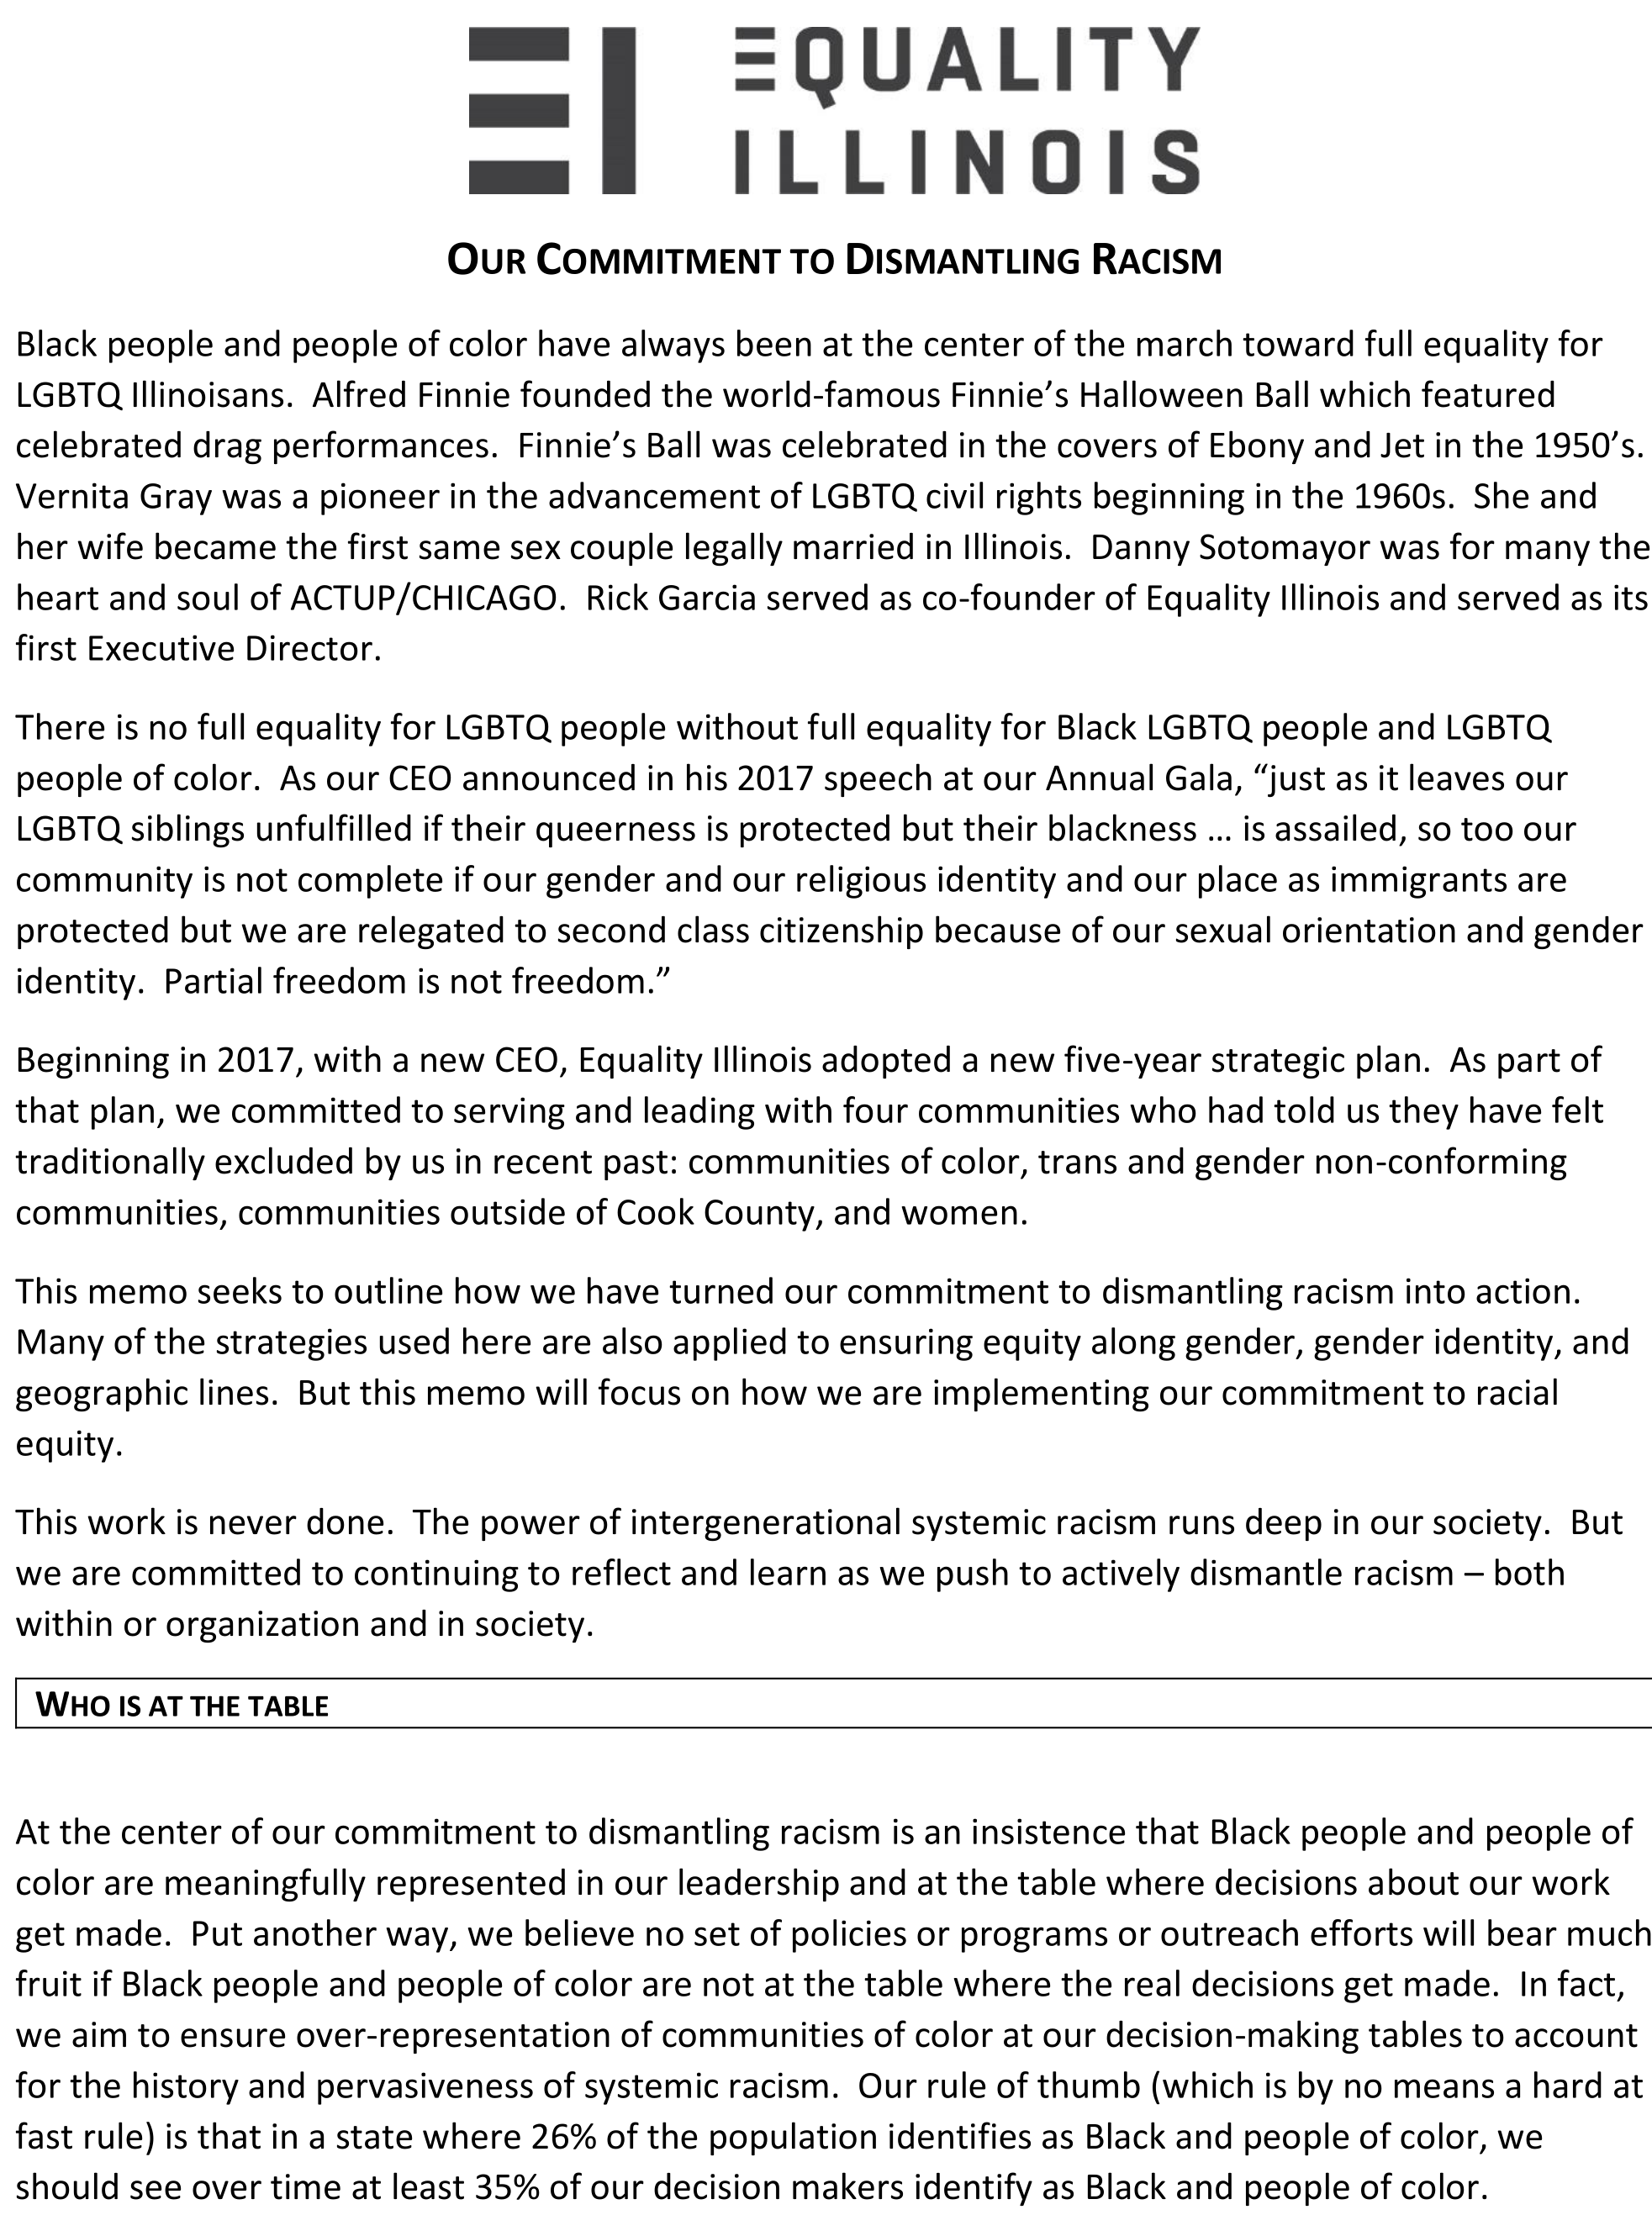 EI Commitment to Dismantling Racism (June 2020) - Page 1 (1)